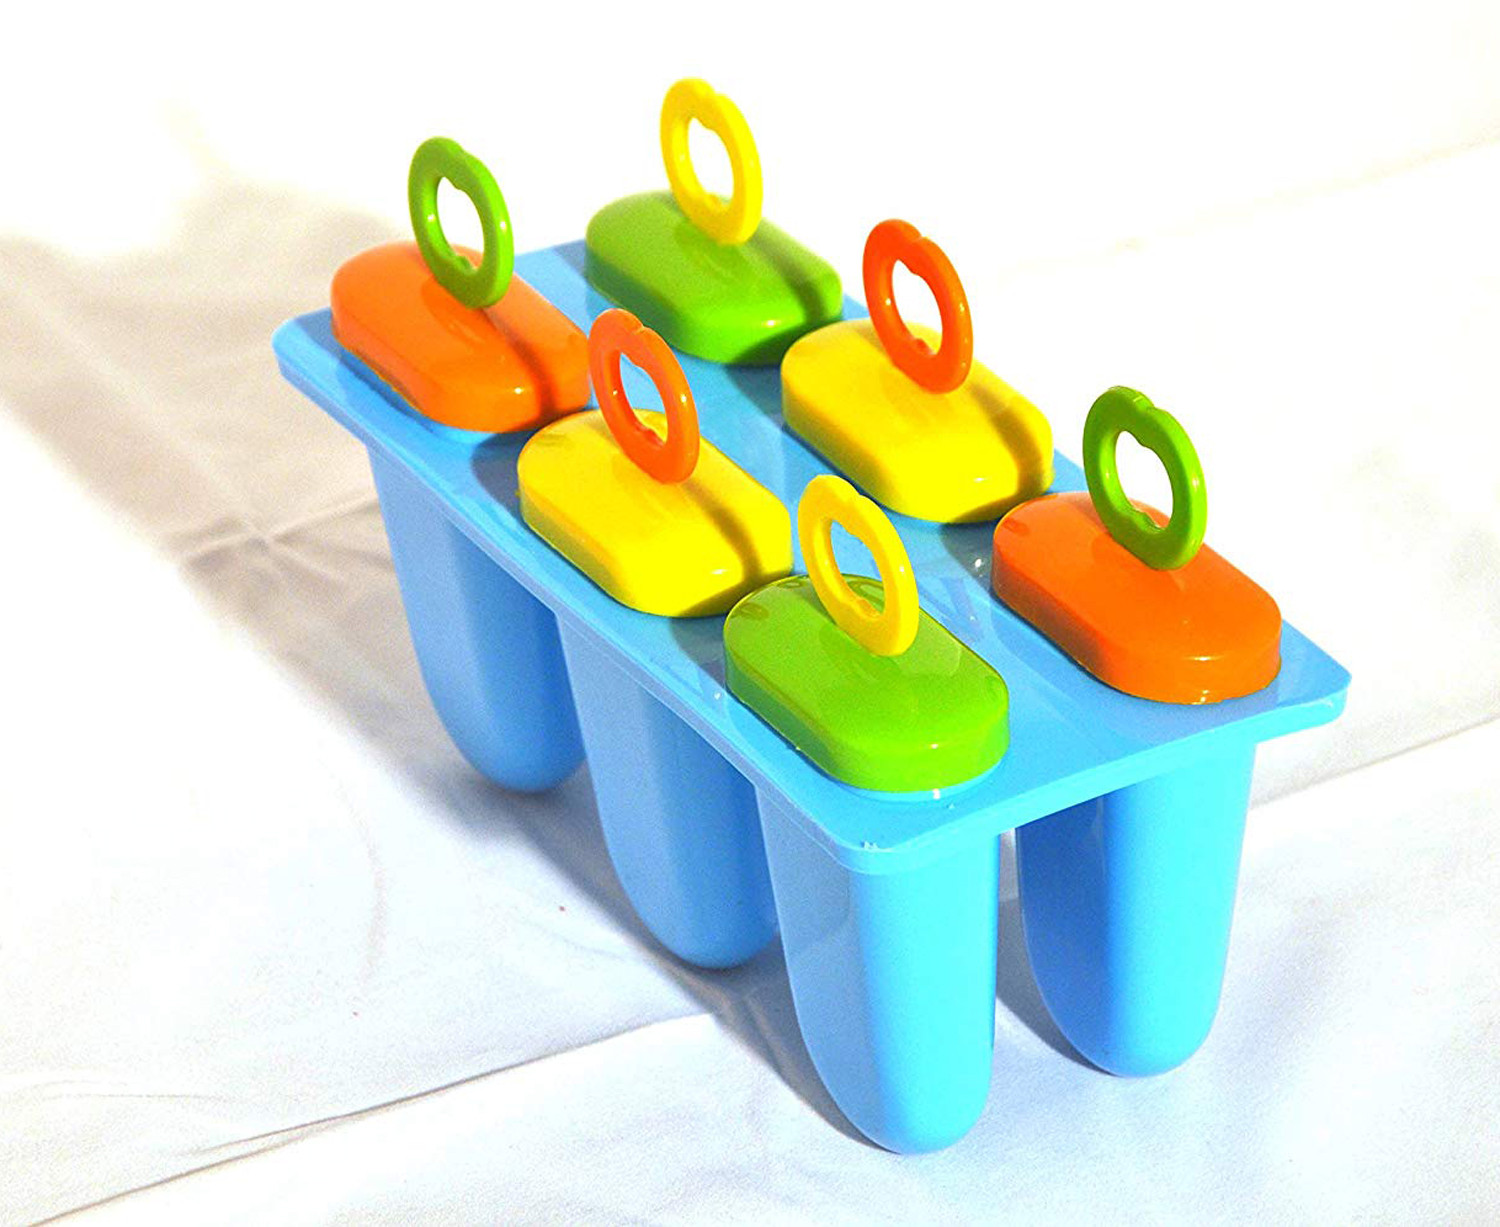 Kuber Industries Plastic Ice Candy Maker Kulfi Maker Moulds Set With 6 Cups (Multi) -CTKTC38131